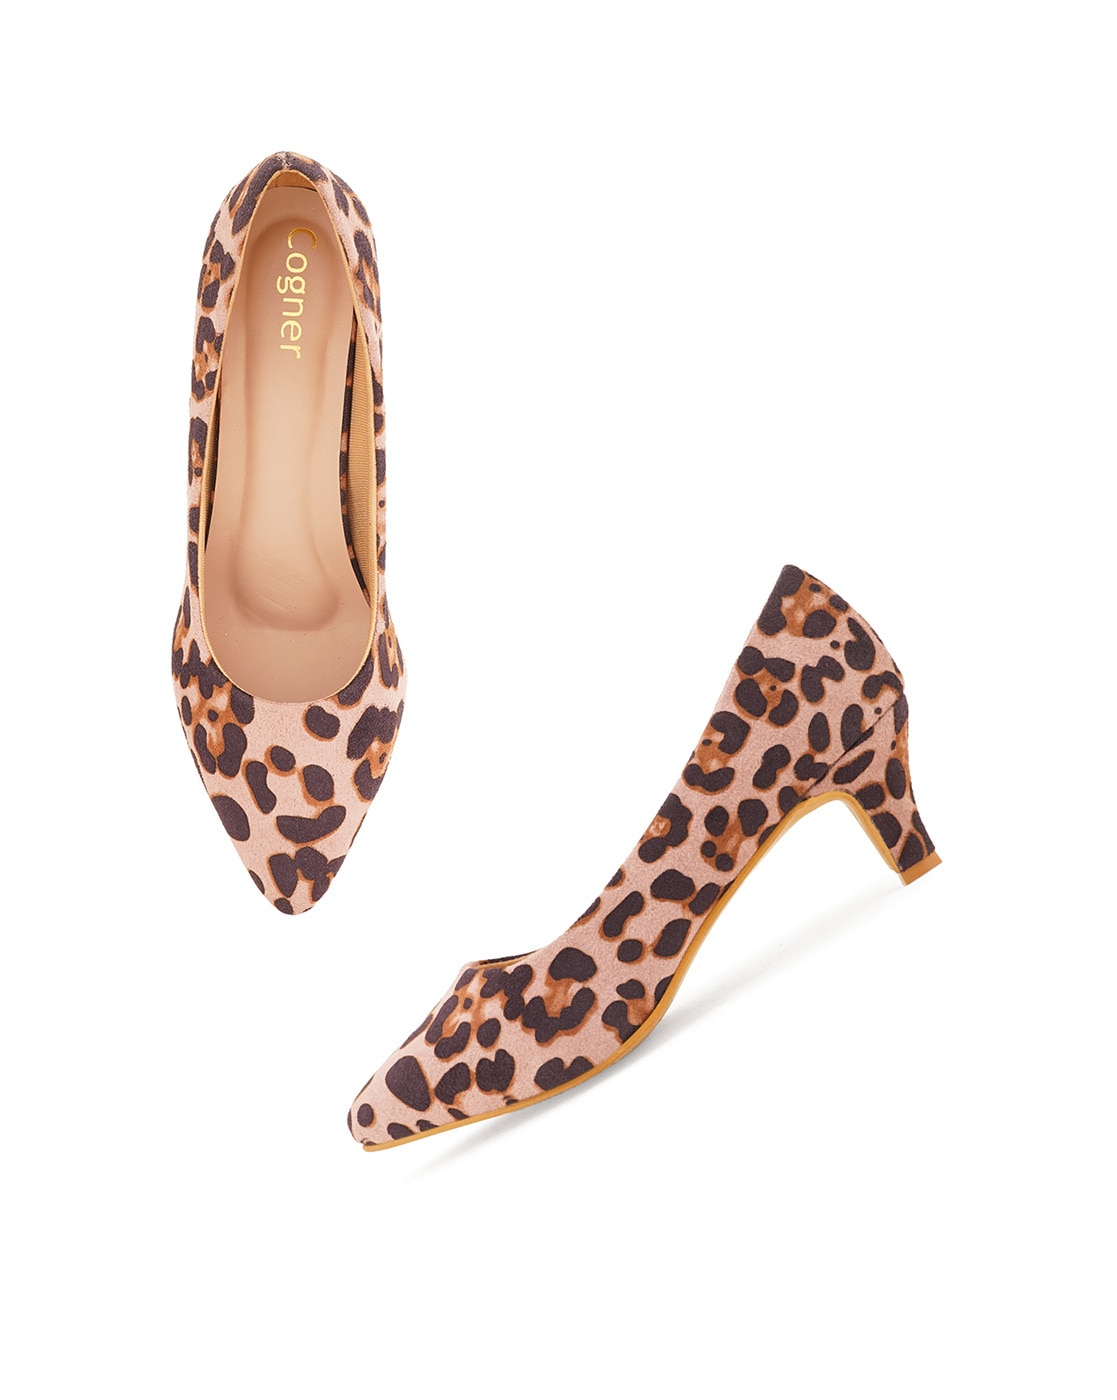 Friday's Fab Finds: Leopard Pumps at Target - The Frugal Fashionista